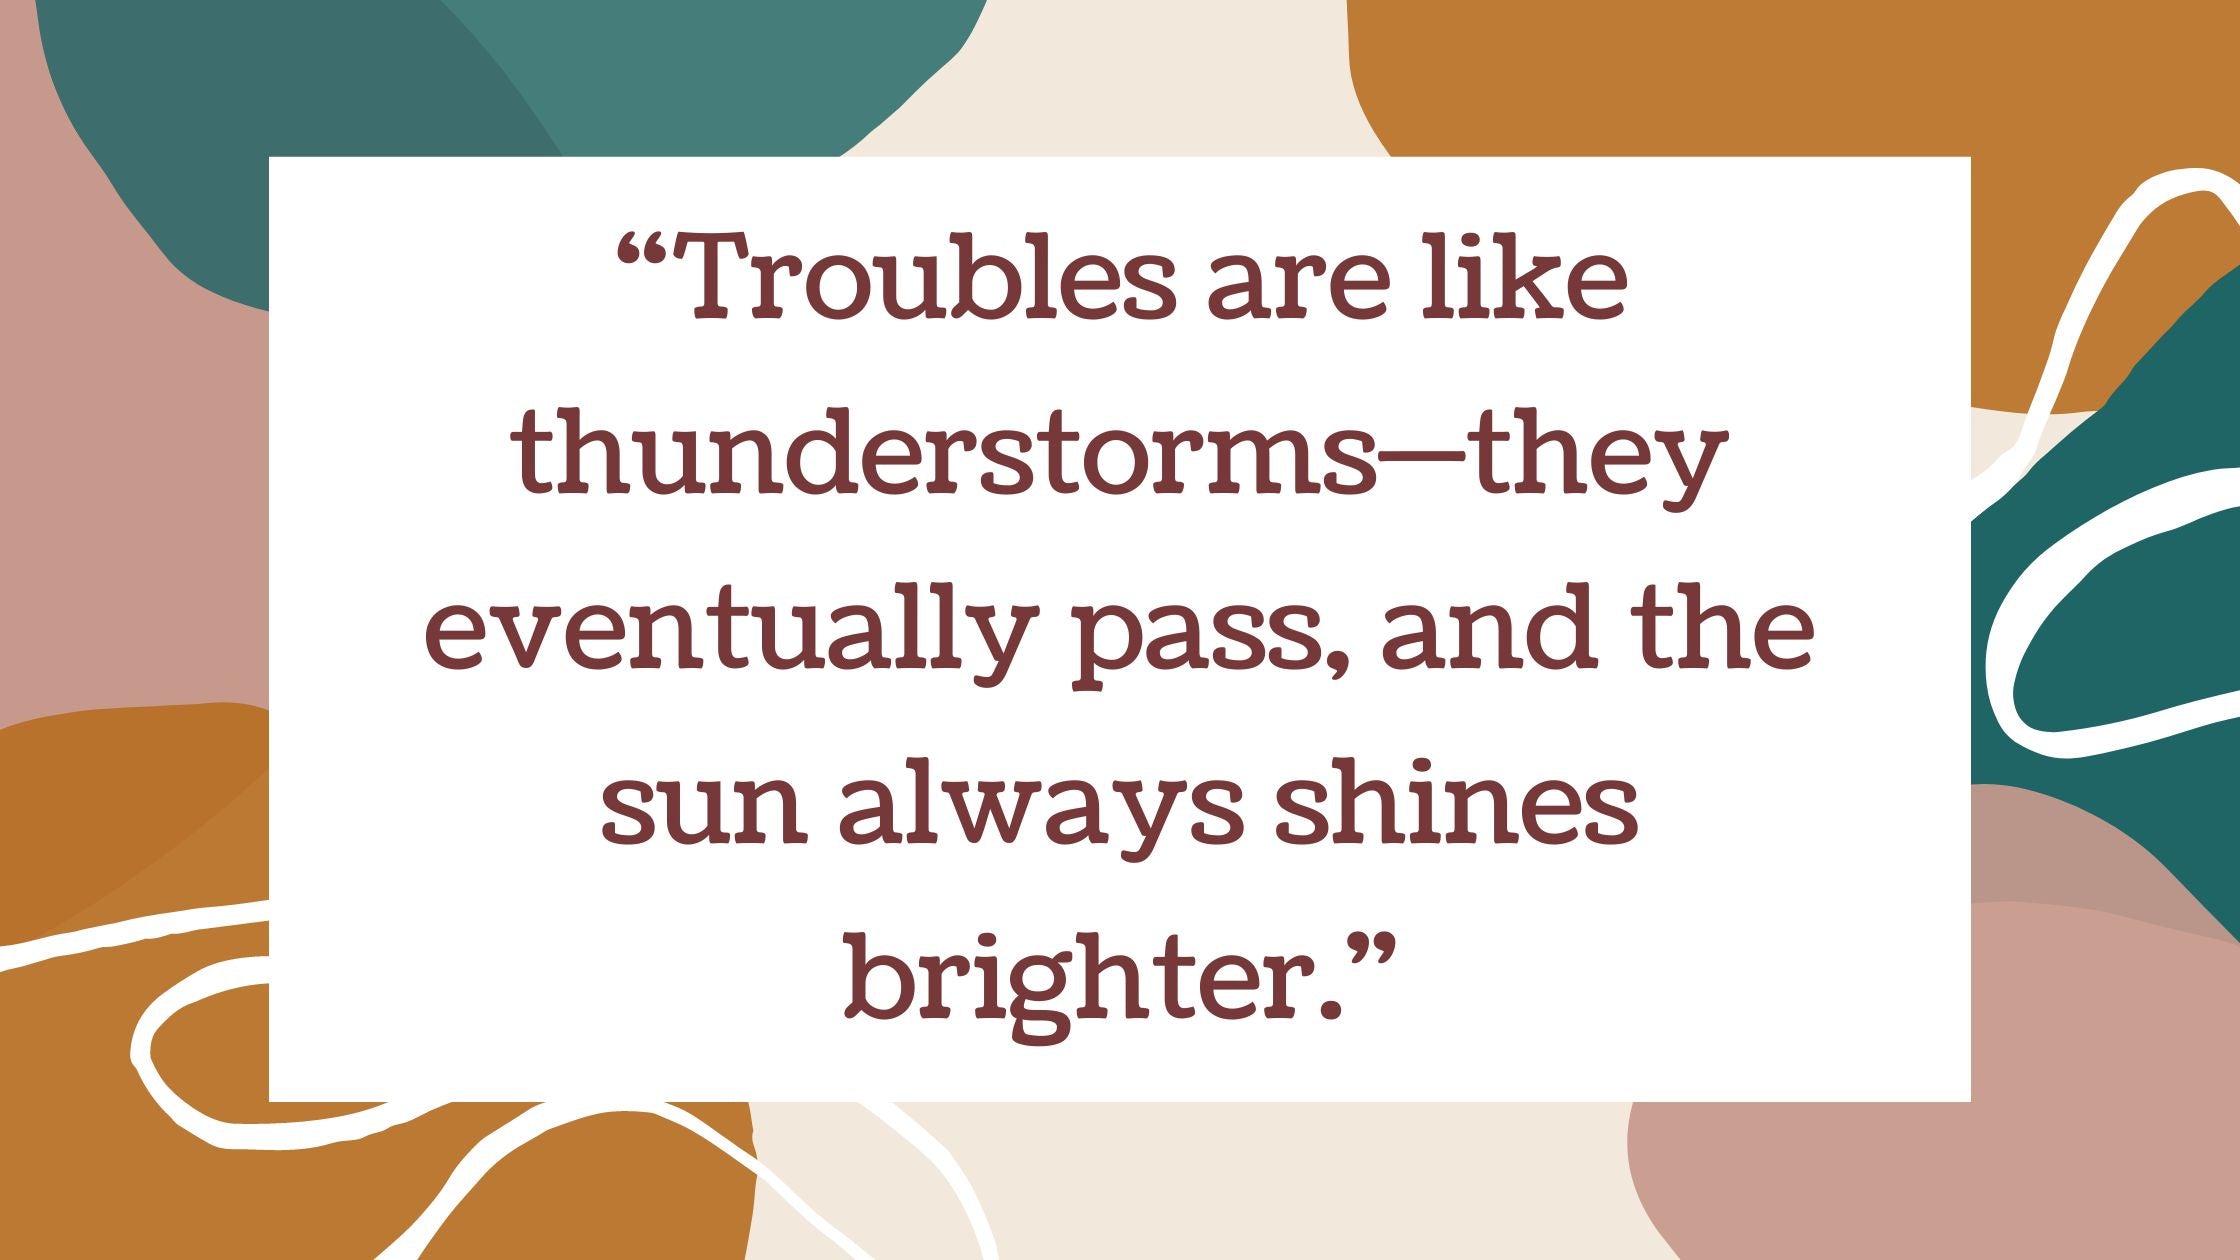 17 Uplifting Quotes About Life's Troubles That Will Inspire You to Keep Going 🌟💪